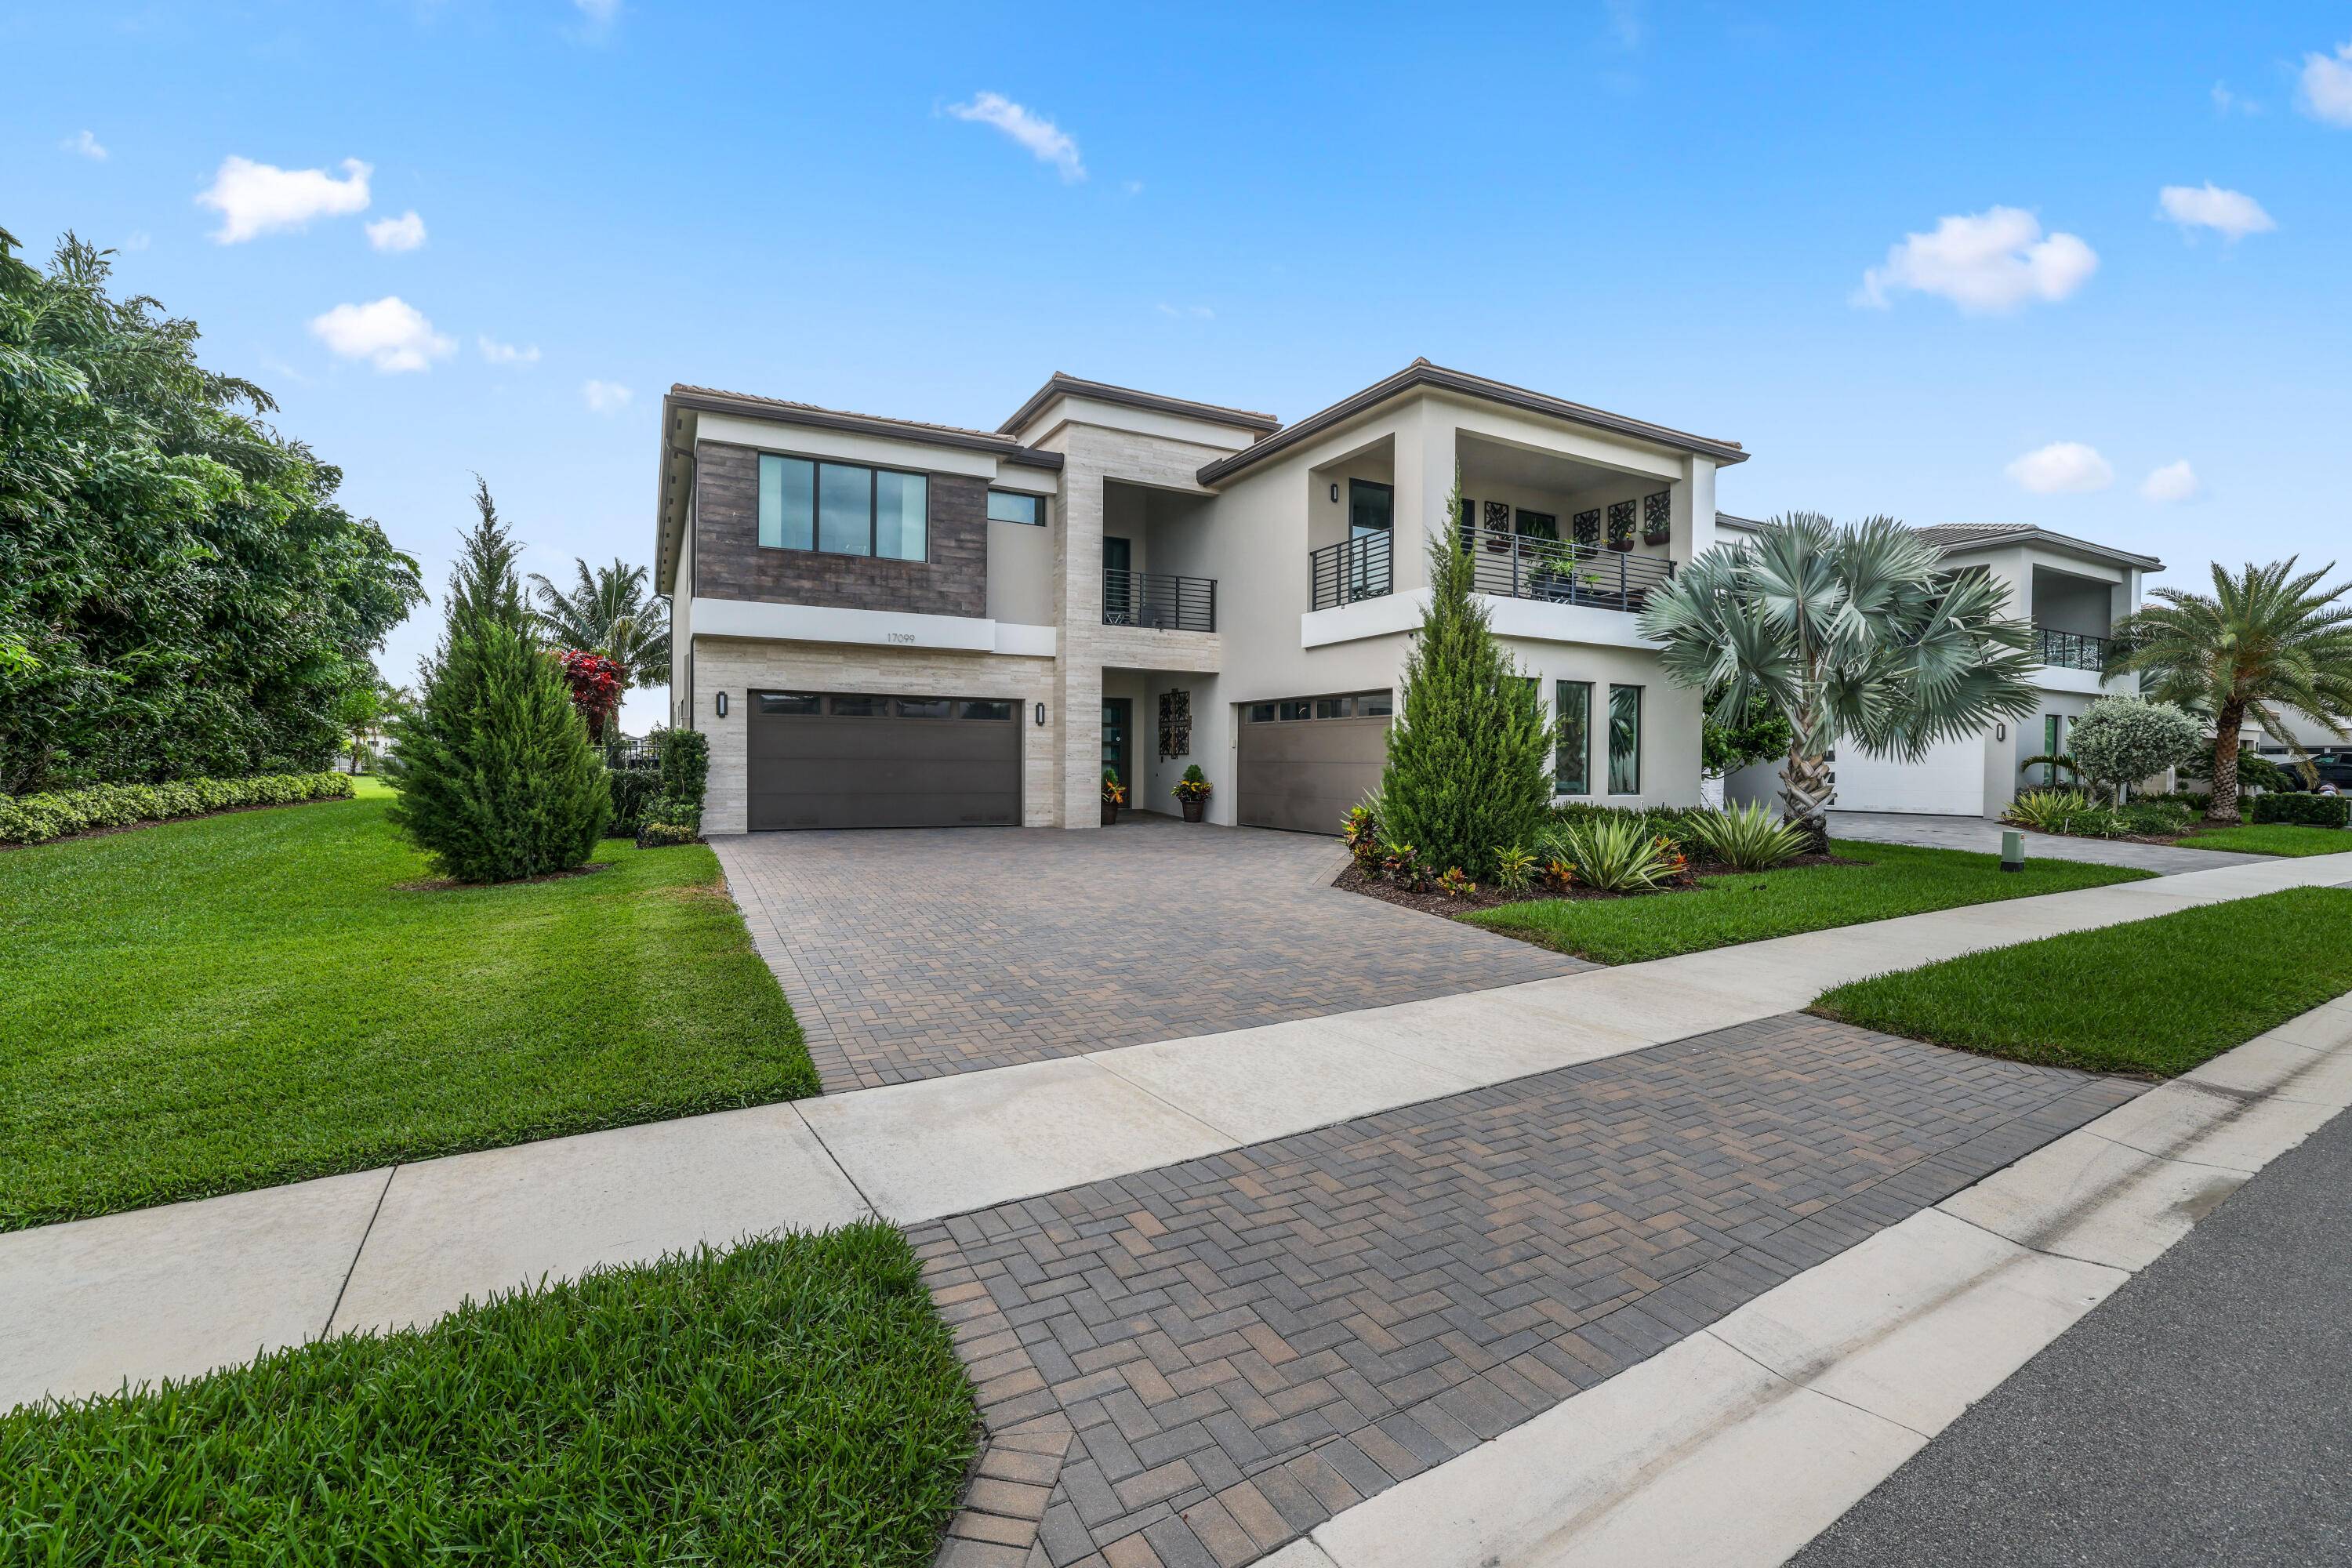 Welcome to your dream home in the coveted Lotus community, where luxury meets comfort in this sprawling estate situated on the best, most private, waterfront premium lot in the whole ...